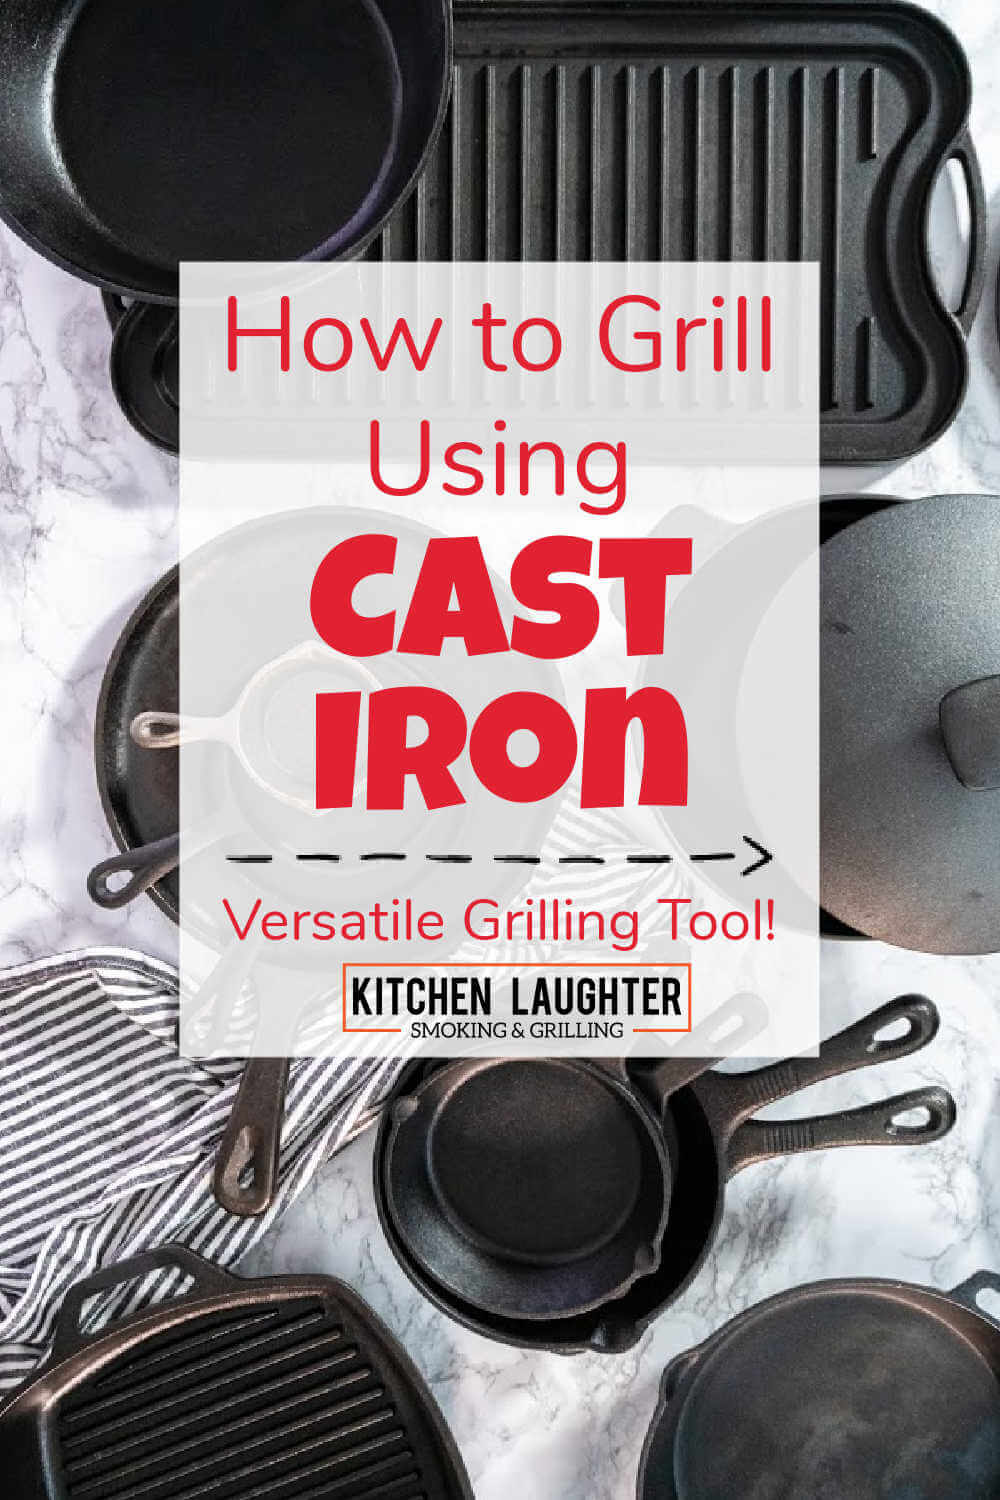 How to Use Cast Iron on the Grill